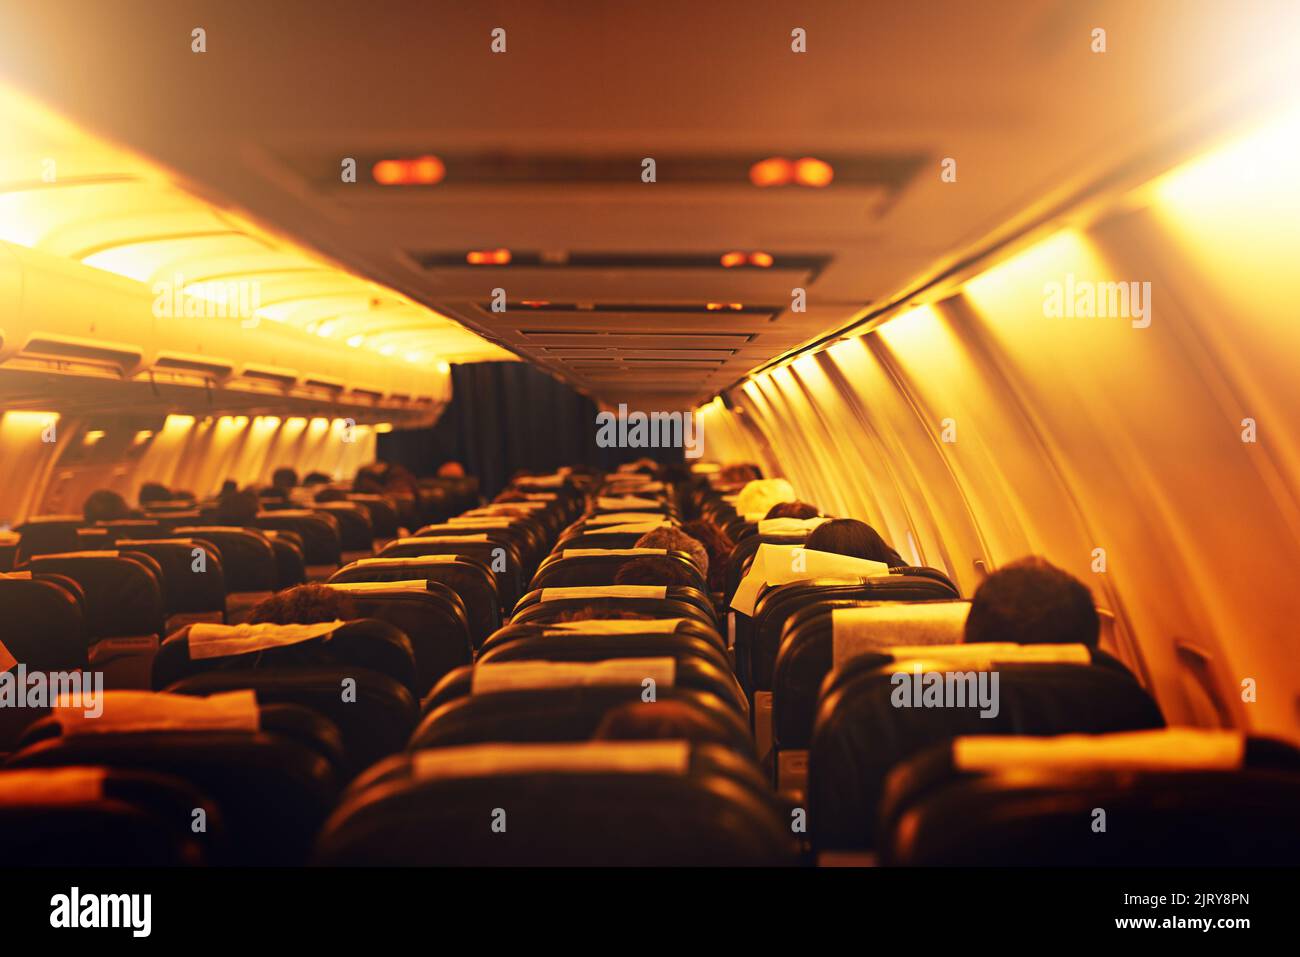 Theres a whole big world to explore out there. passenger seating inside an airplane. Stock Photo